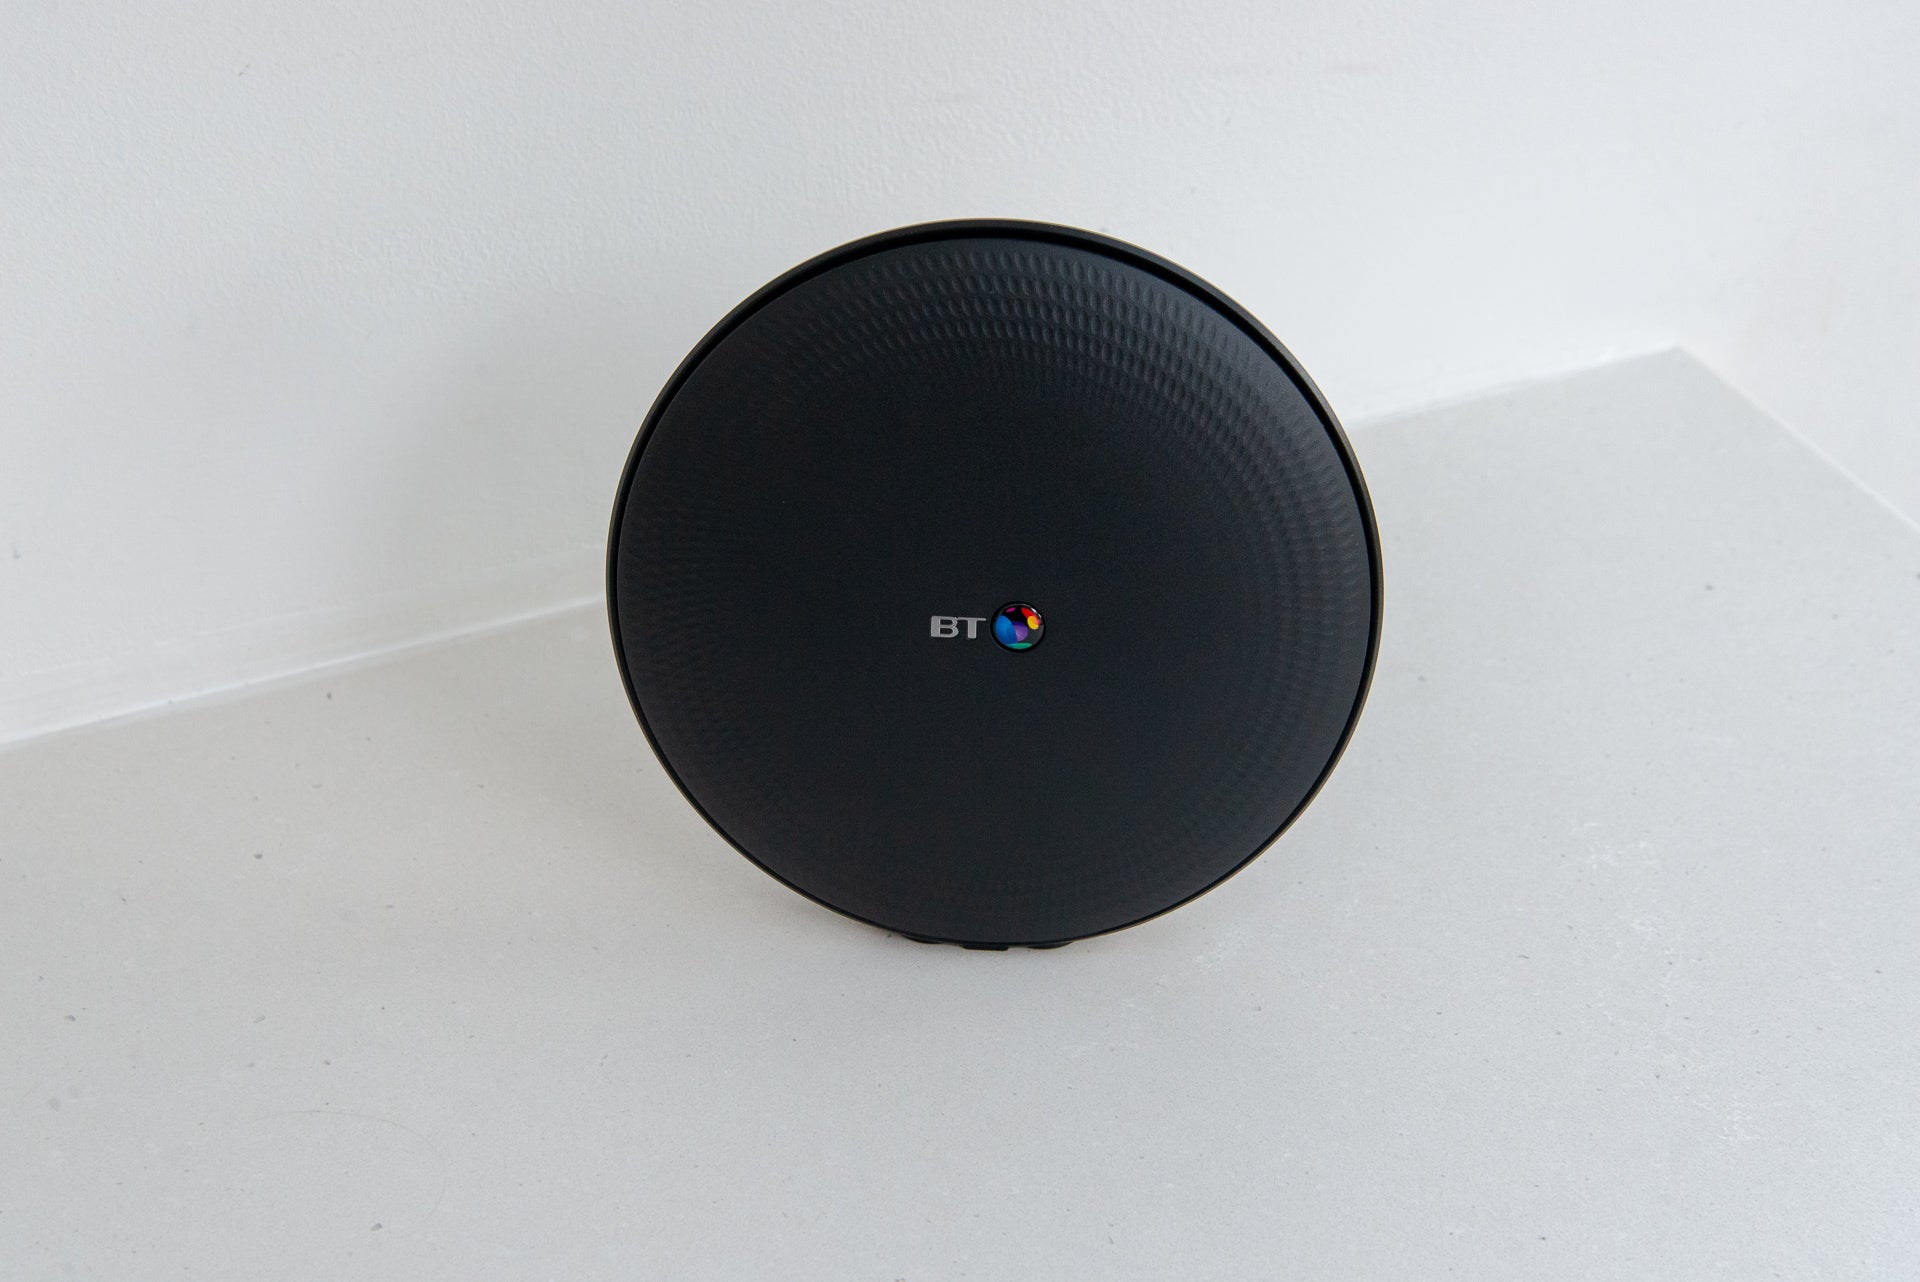 BT Complete Wi-Fi Disc